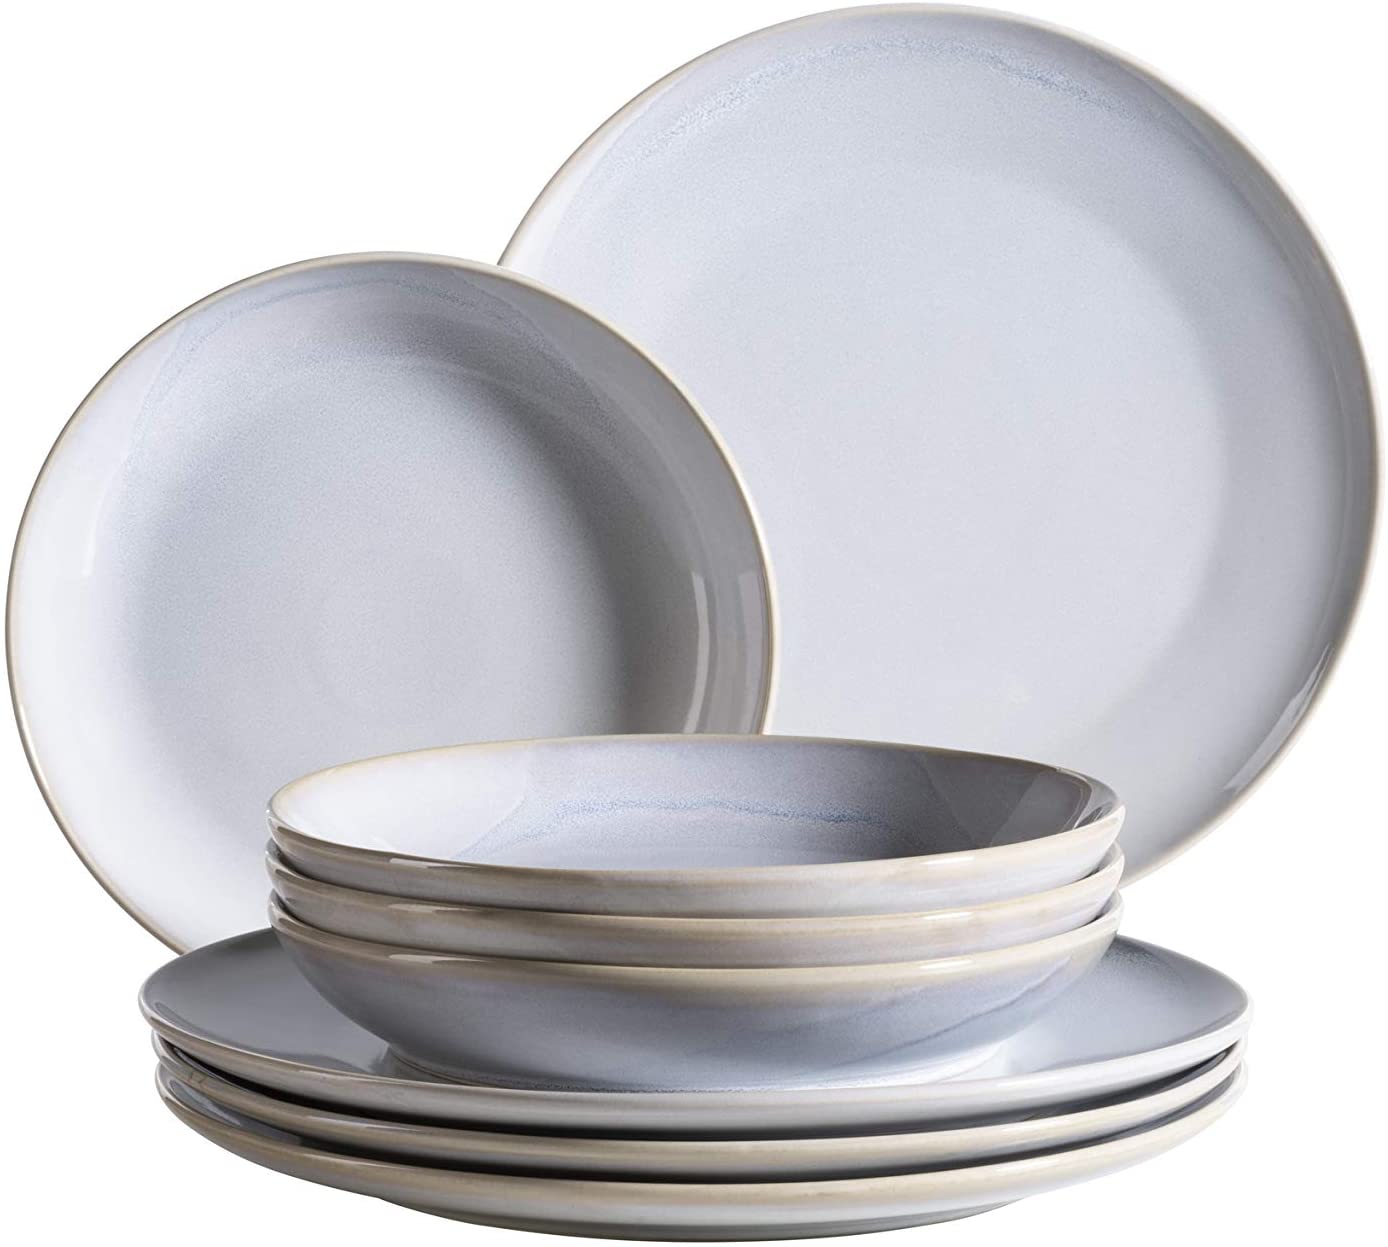 Mäser, Il Lago Series 4 Piece Plate Set in Light Blue Ceramic Tableware Serving Plates Charger for 4 People